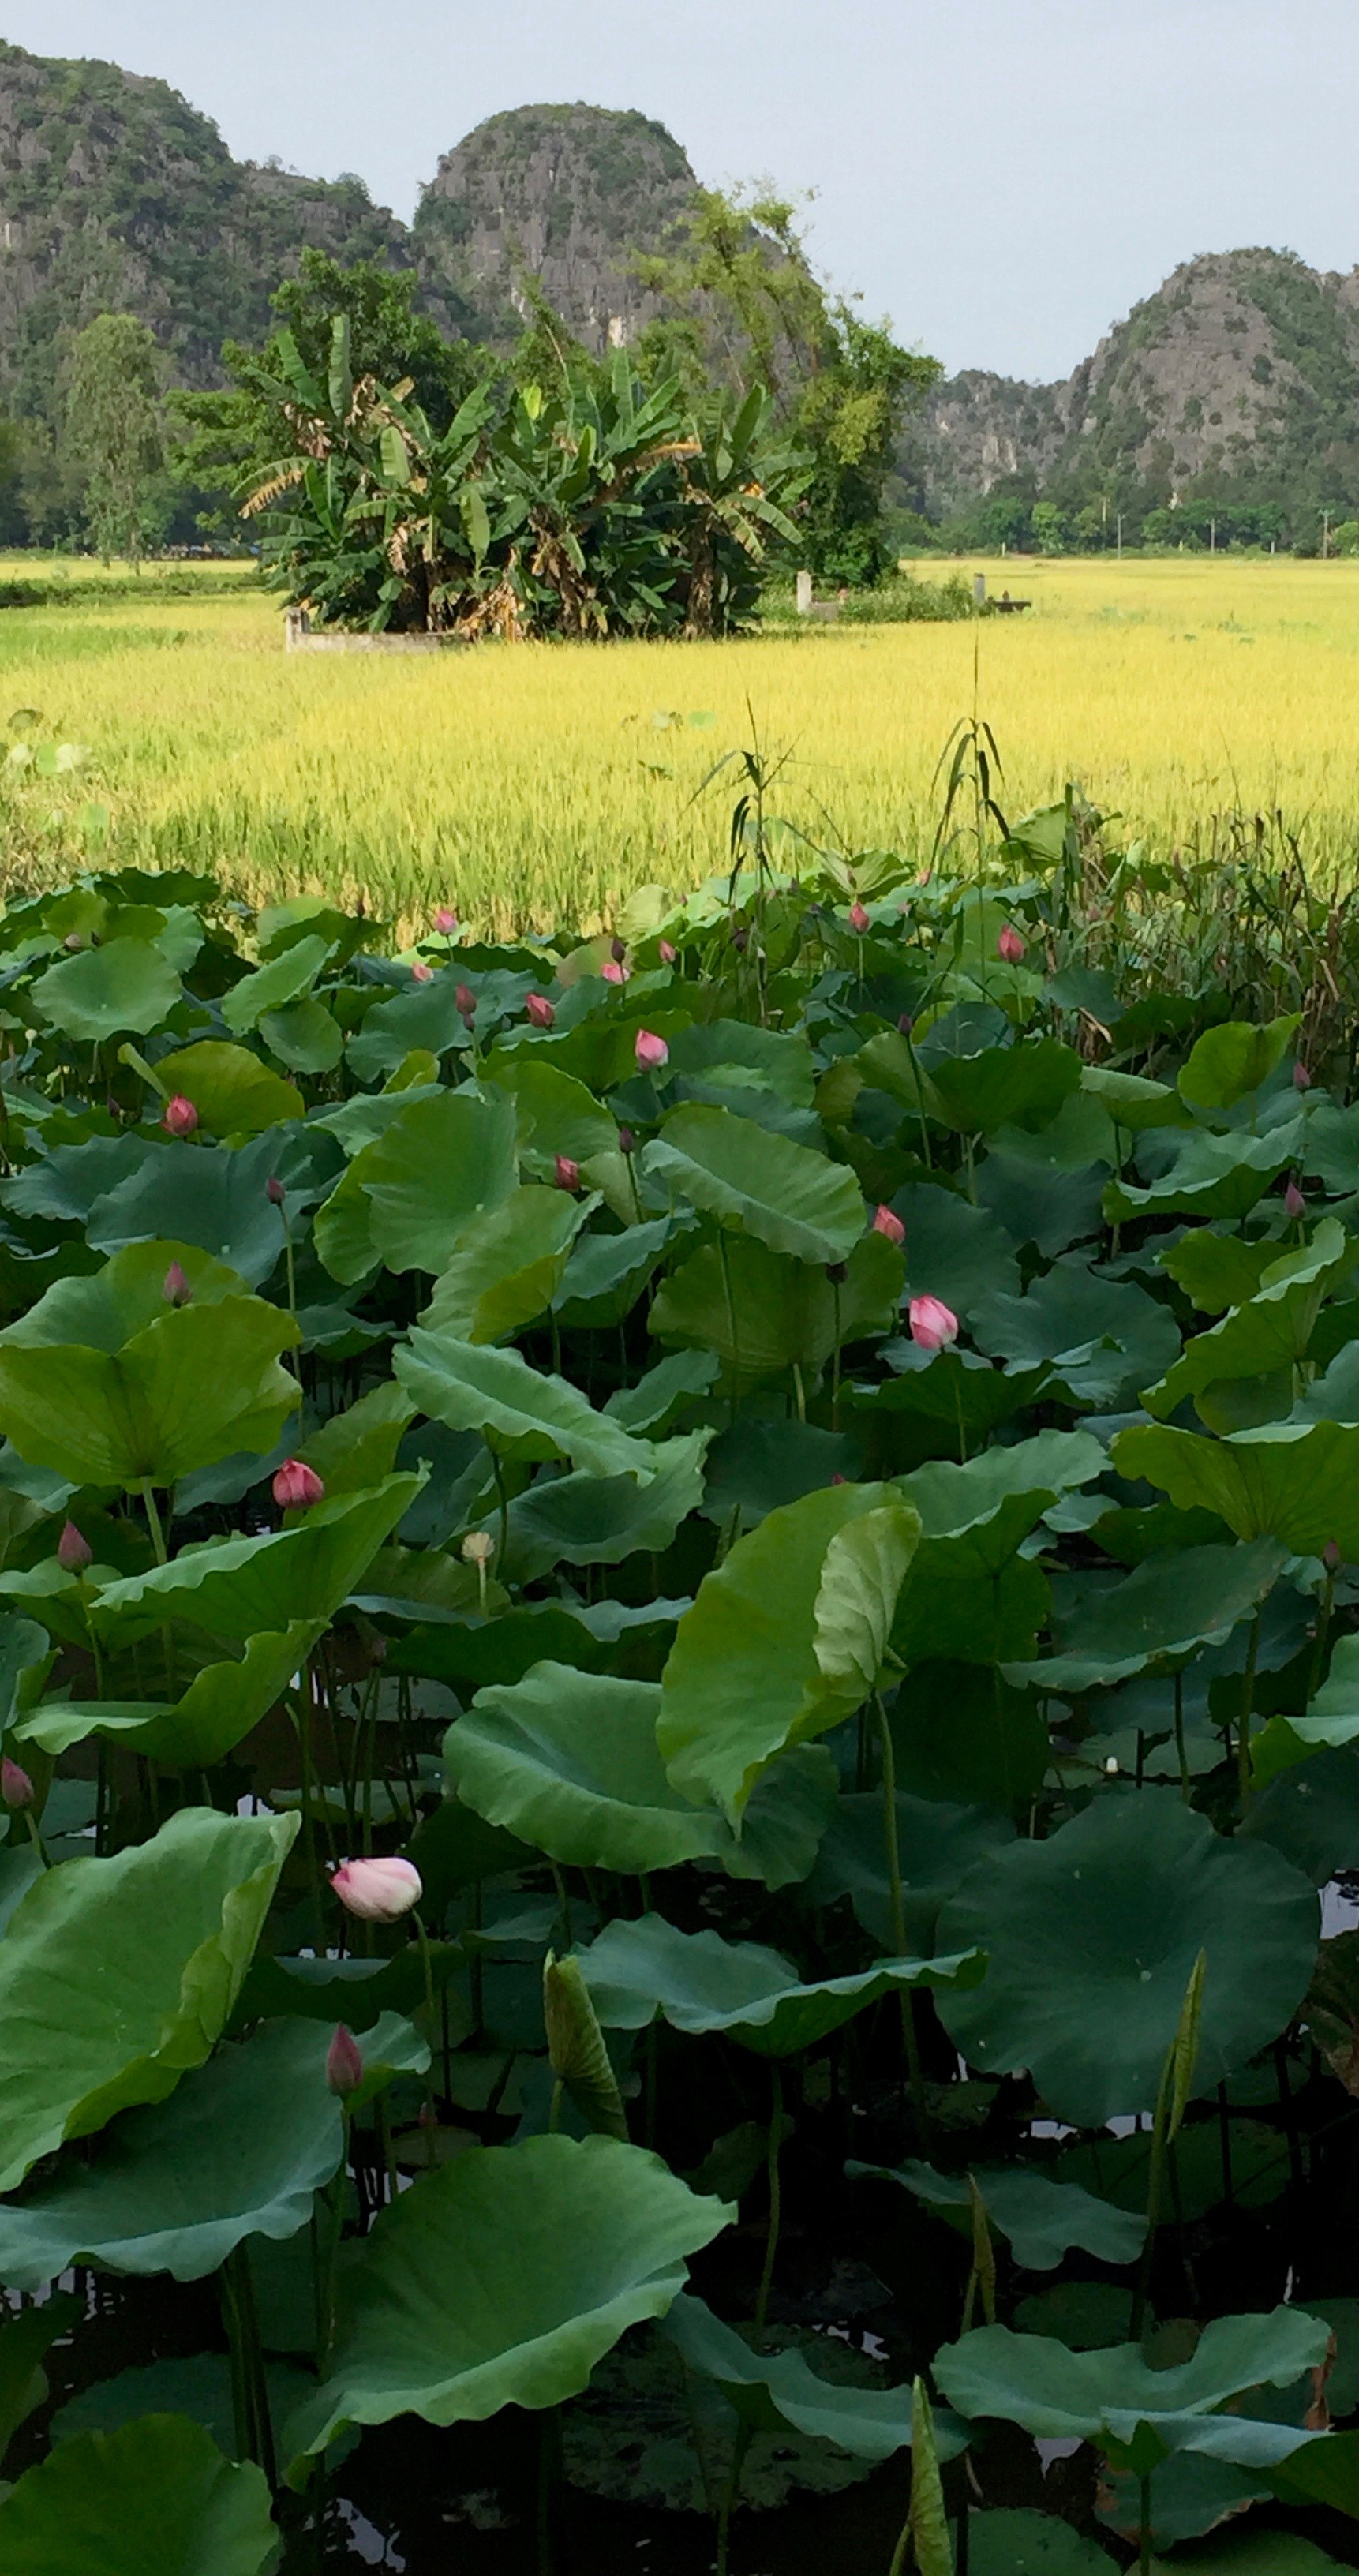 lotus flowers and rice fields in Vietnam